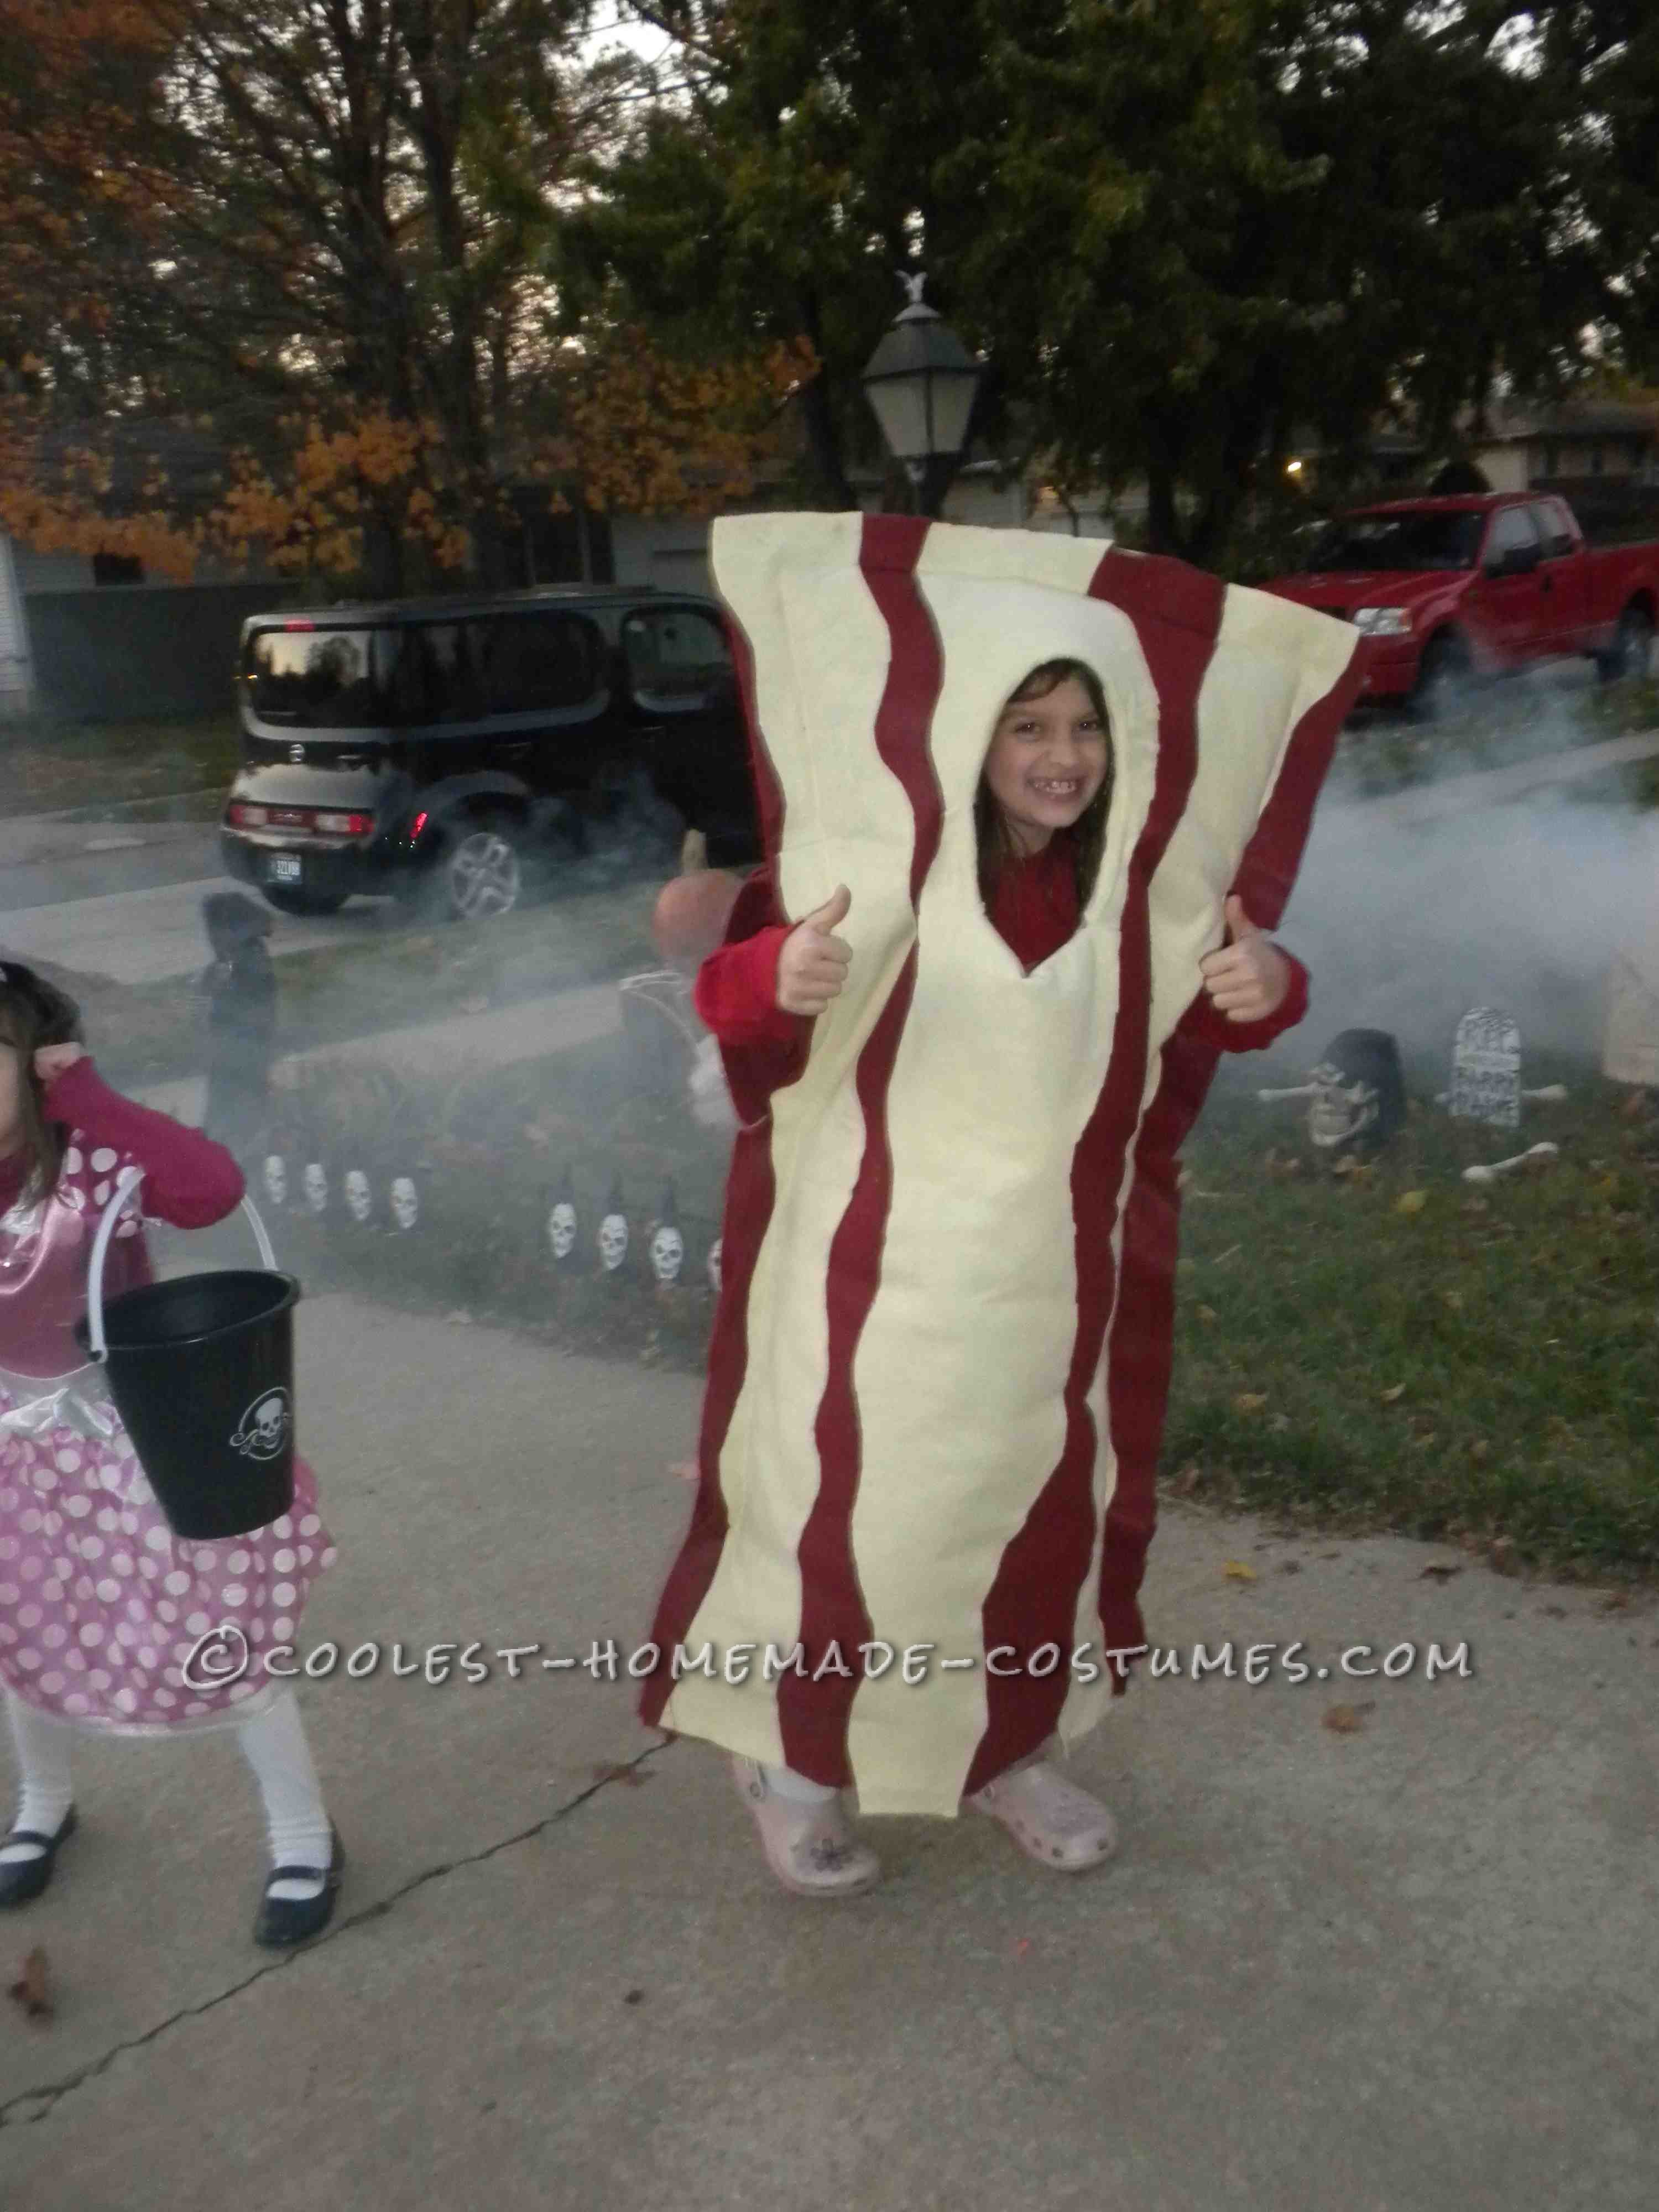 My daughter 9 year old daughter loves bacon so much she asked if she could be BACON for Halloween.  At first I thought she was joking but after